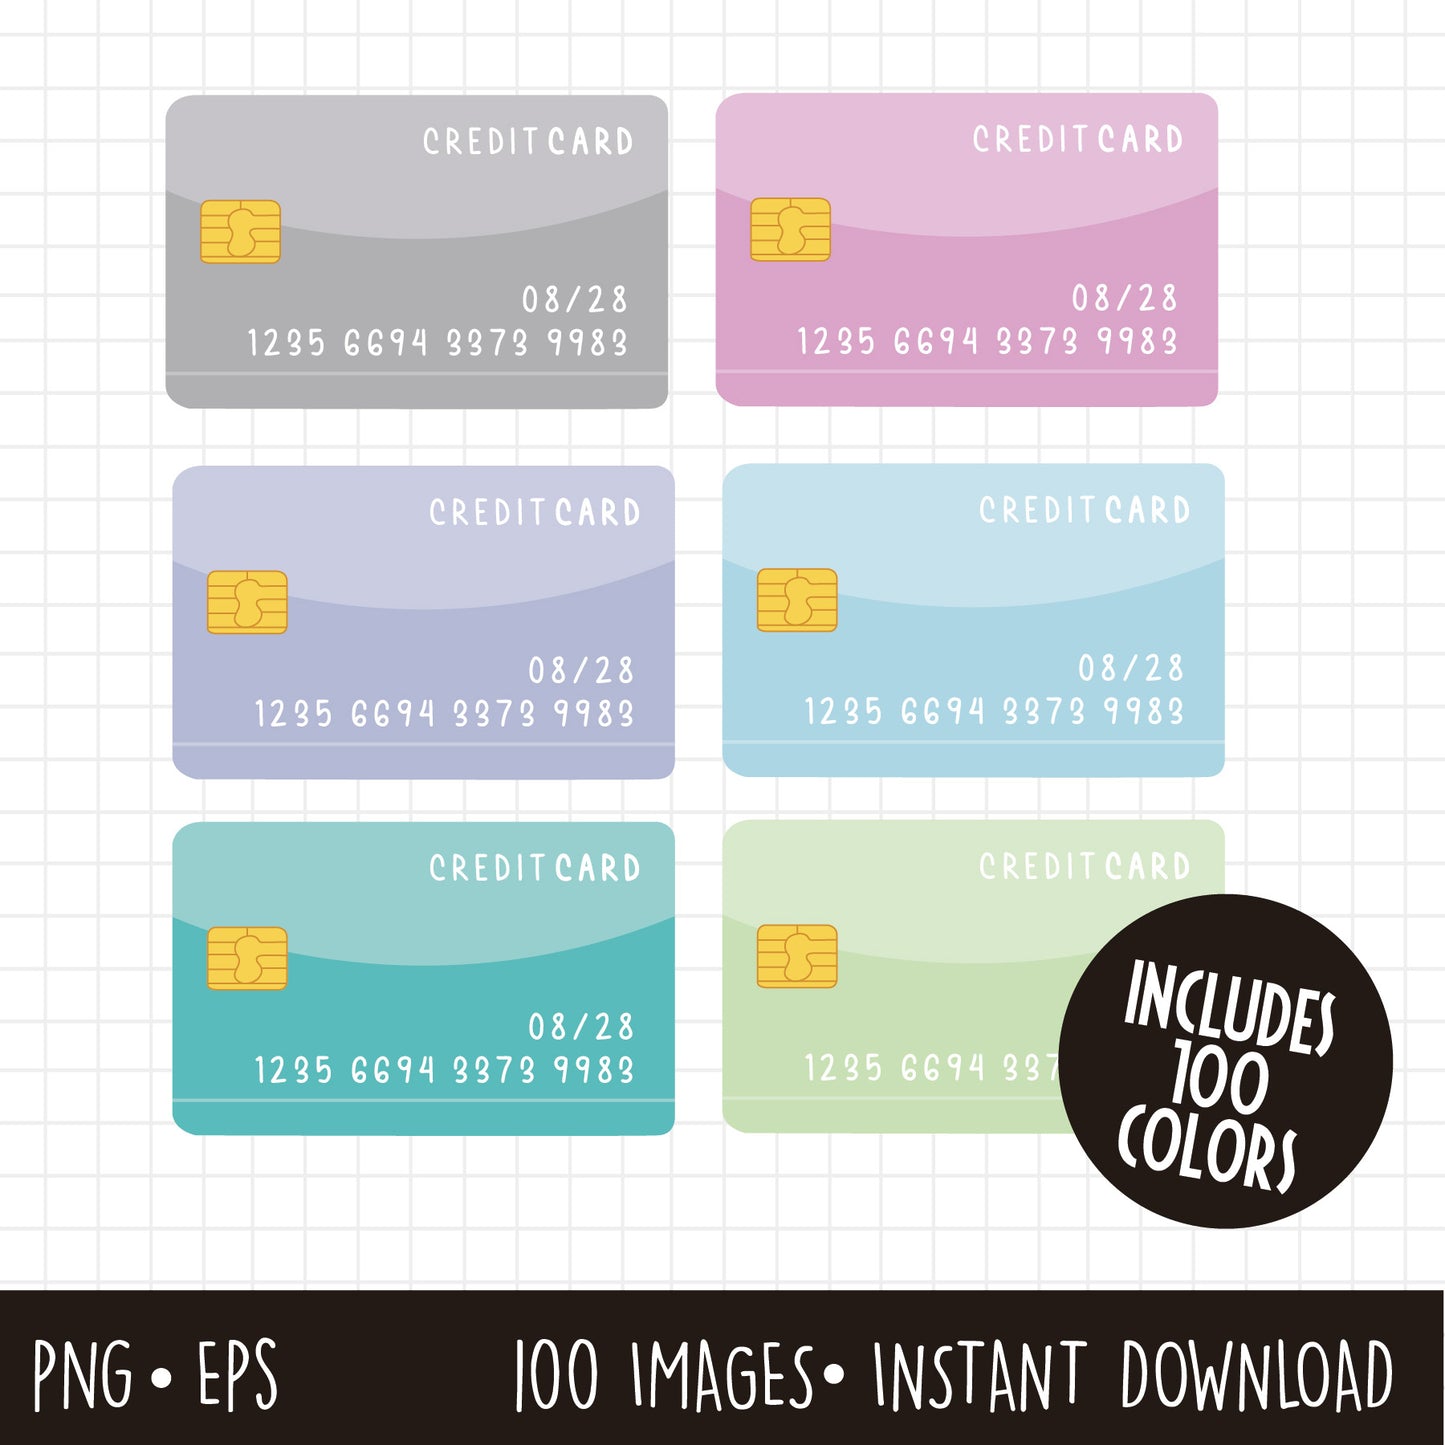 COD787 - Credit Card Clipart, Digital Clipart - Instant Download - PNG files included